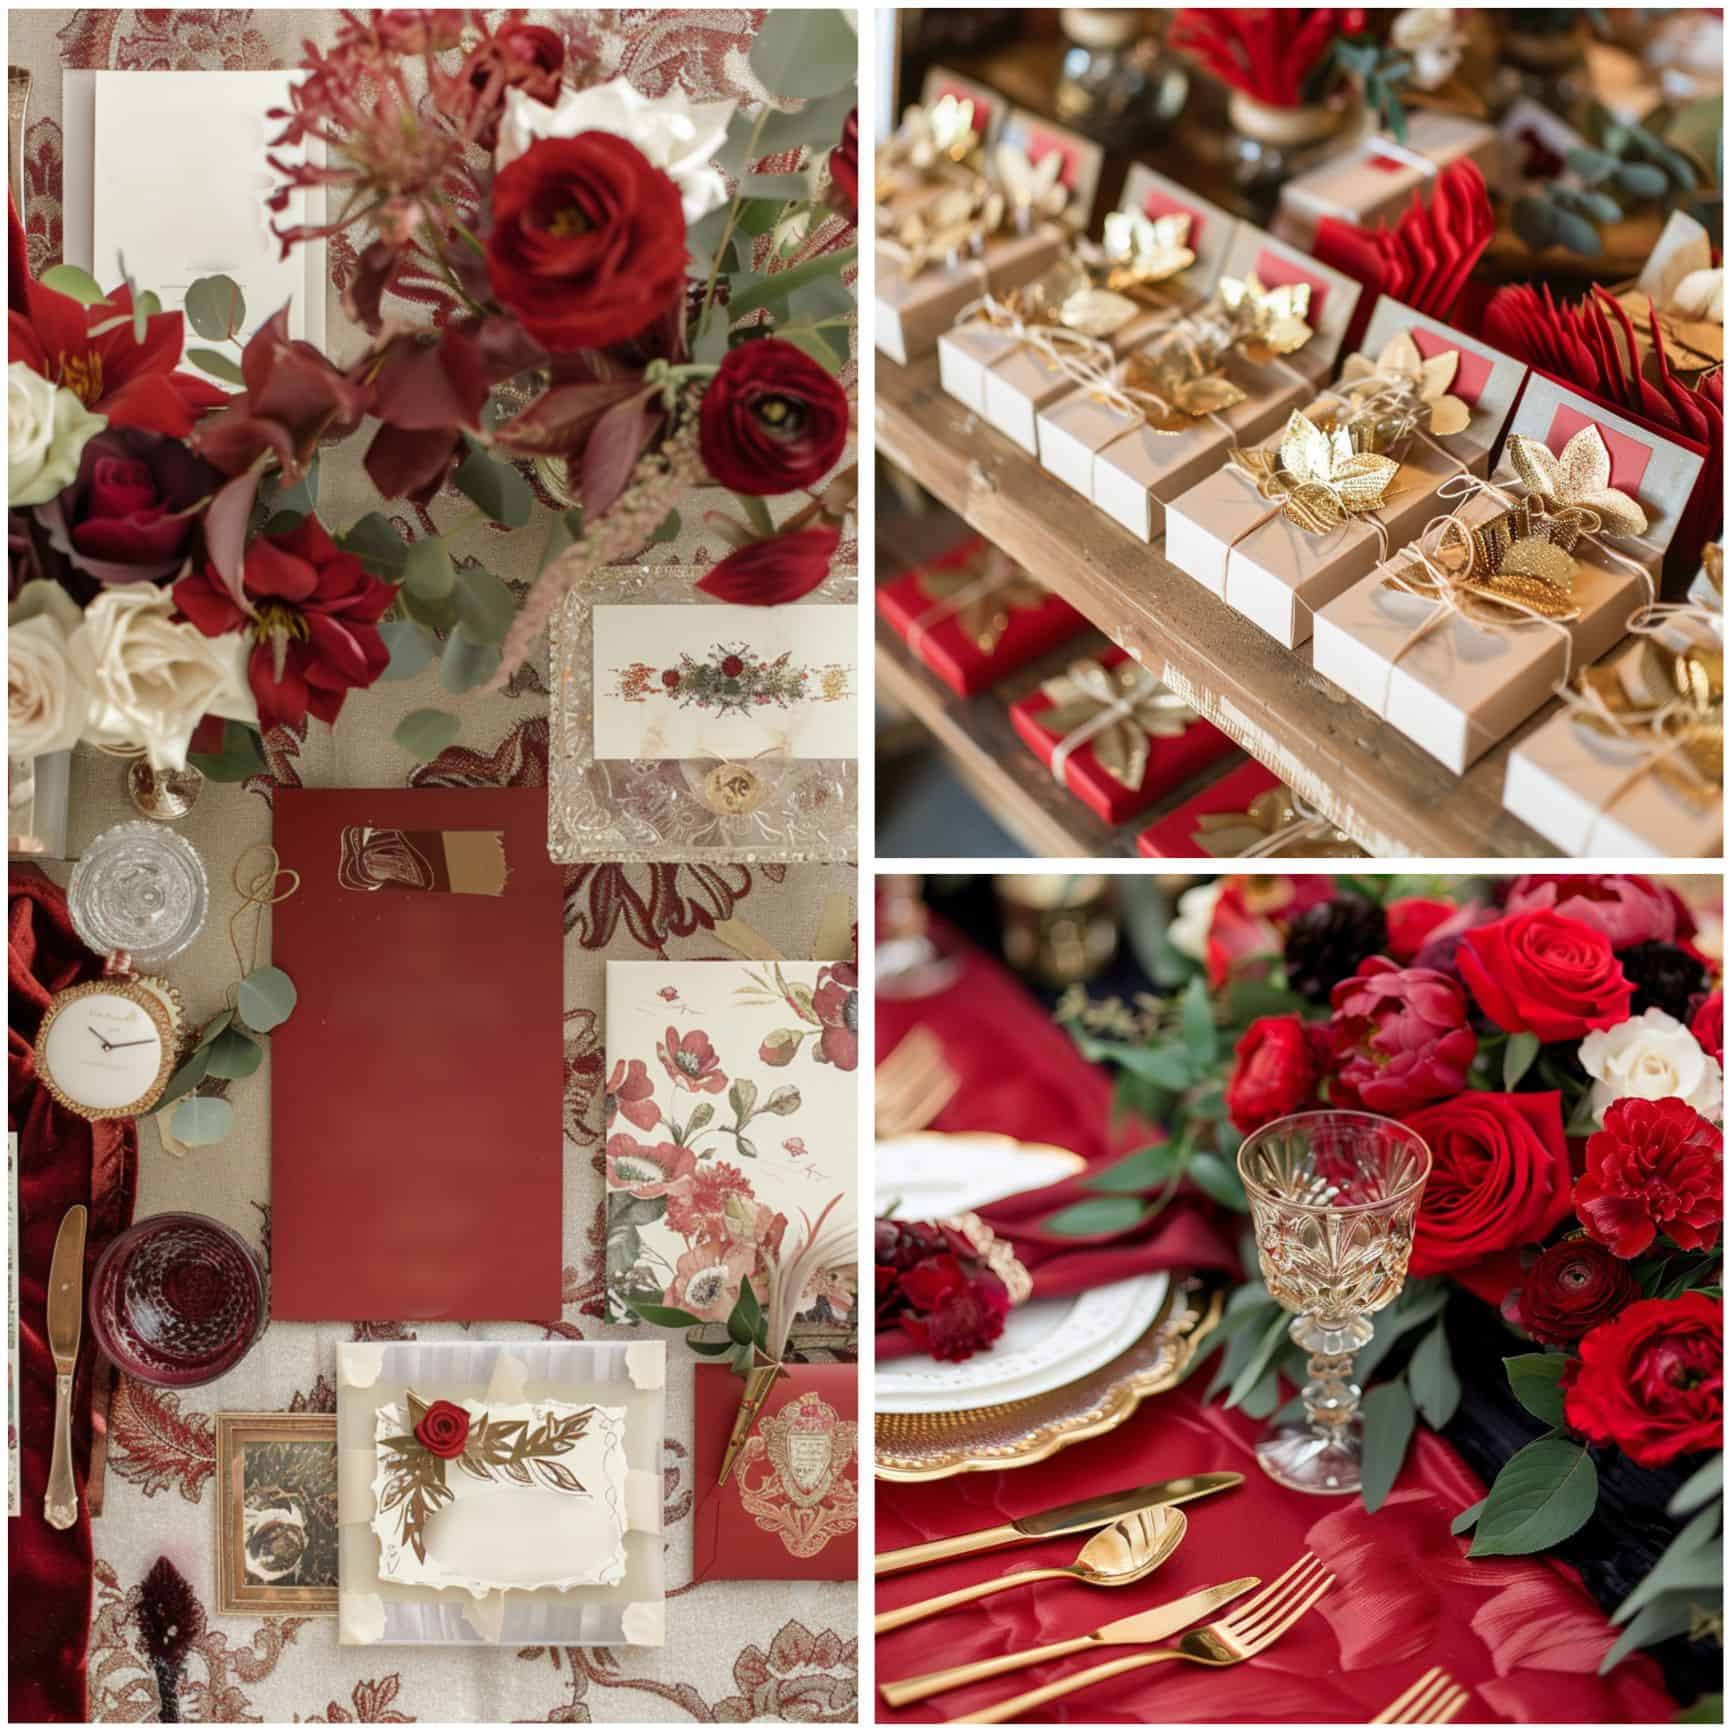 red and gold wedding theme ideas for small details